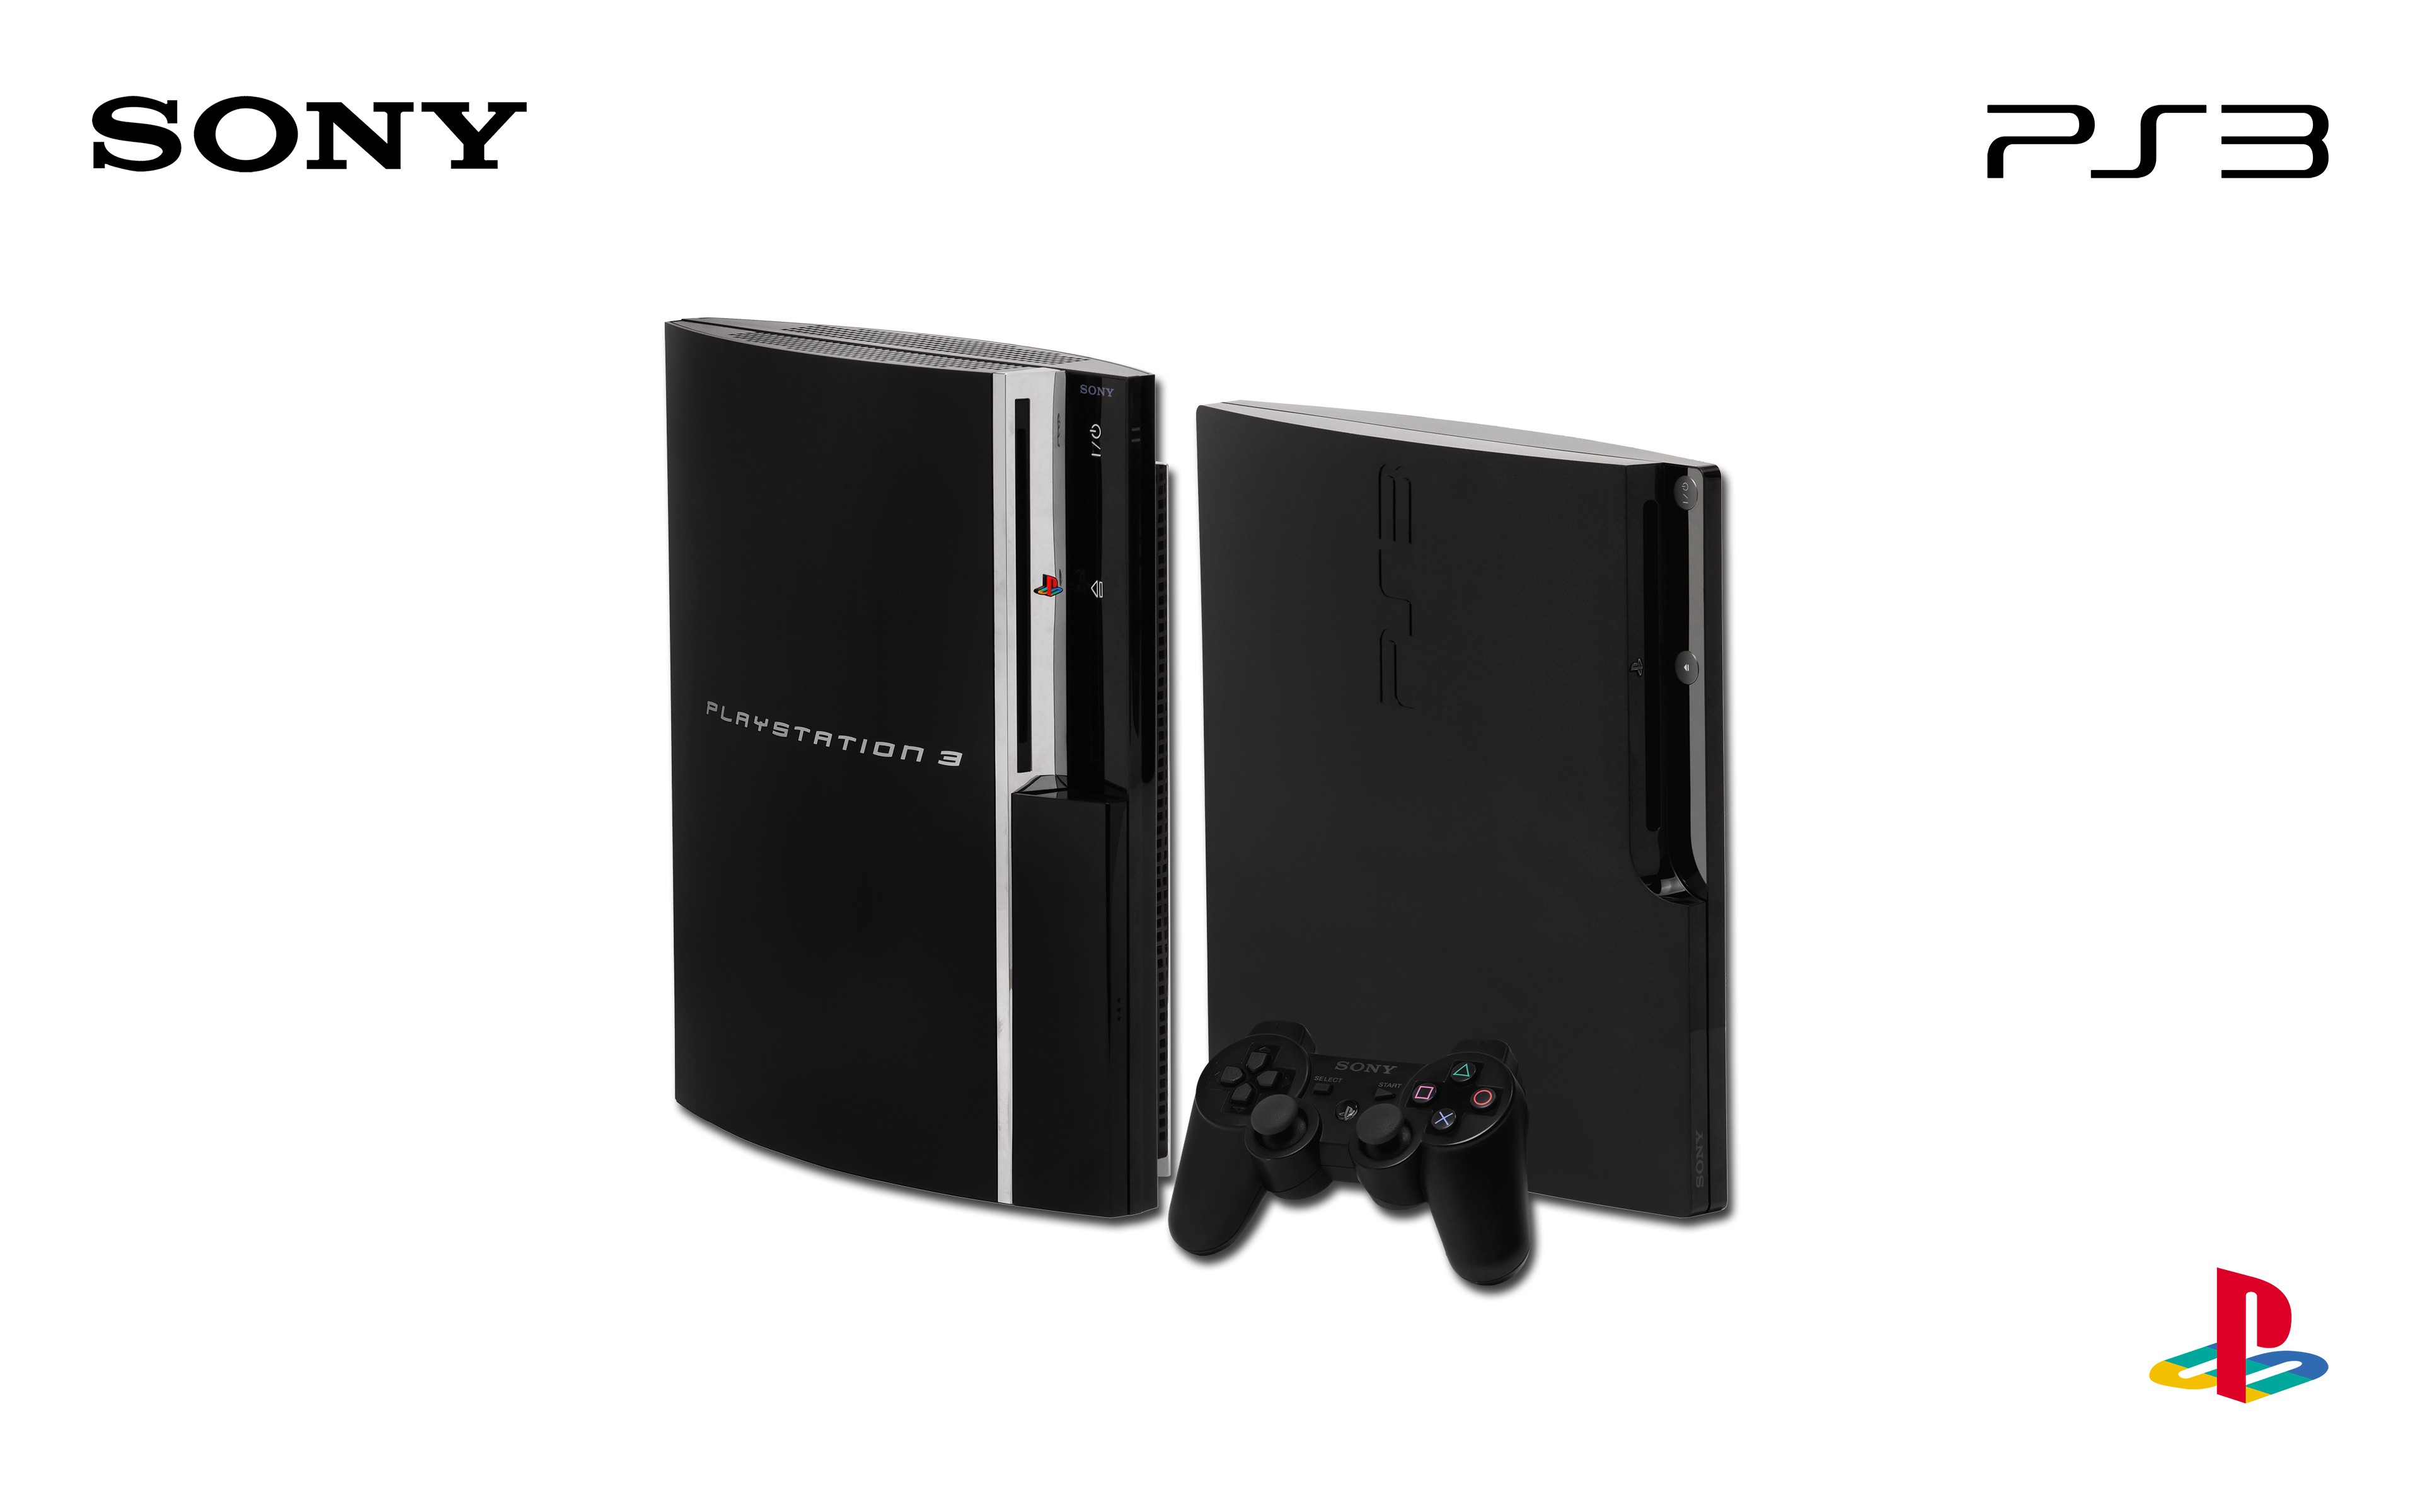 PlayStation 3, Consoles, Sony, Video Games, Simple Background Wallpaper